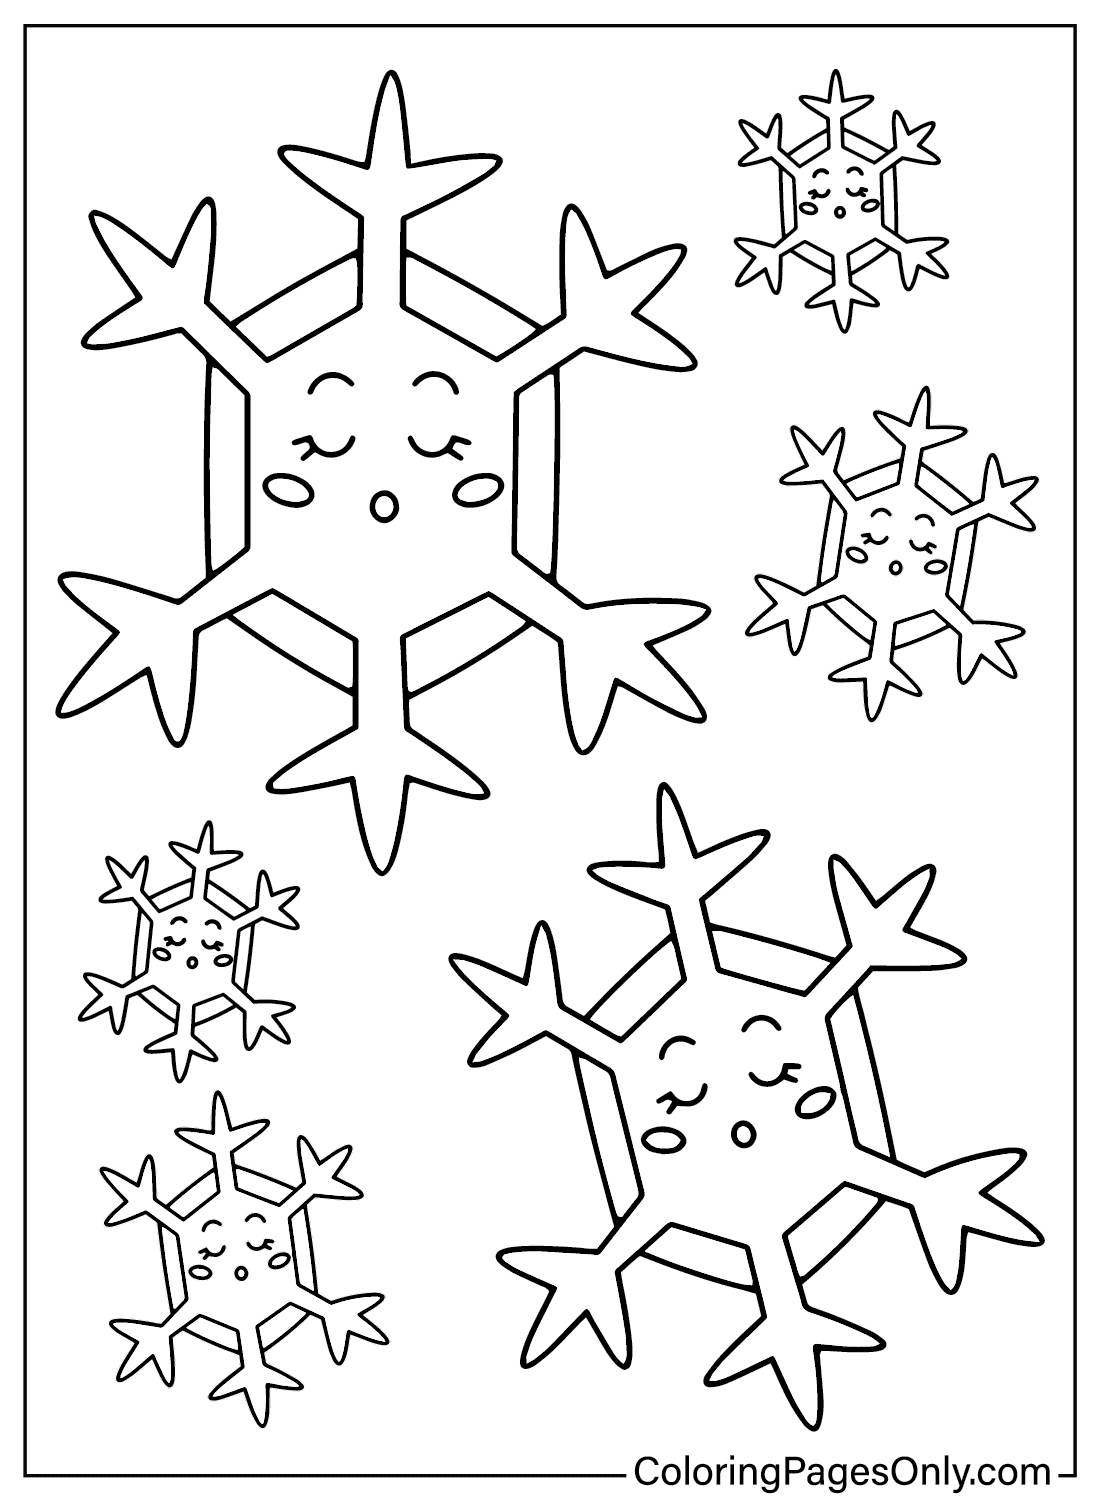 Snowflake Printable Coloring Page from Snowflake